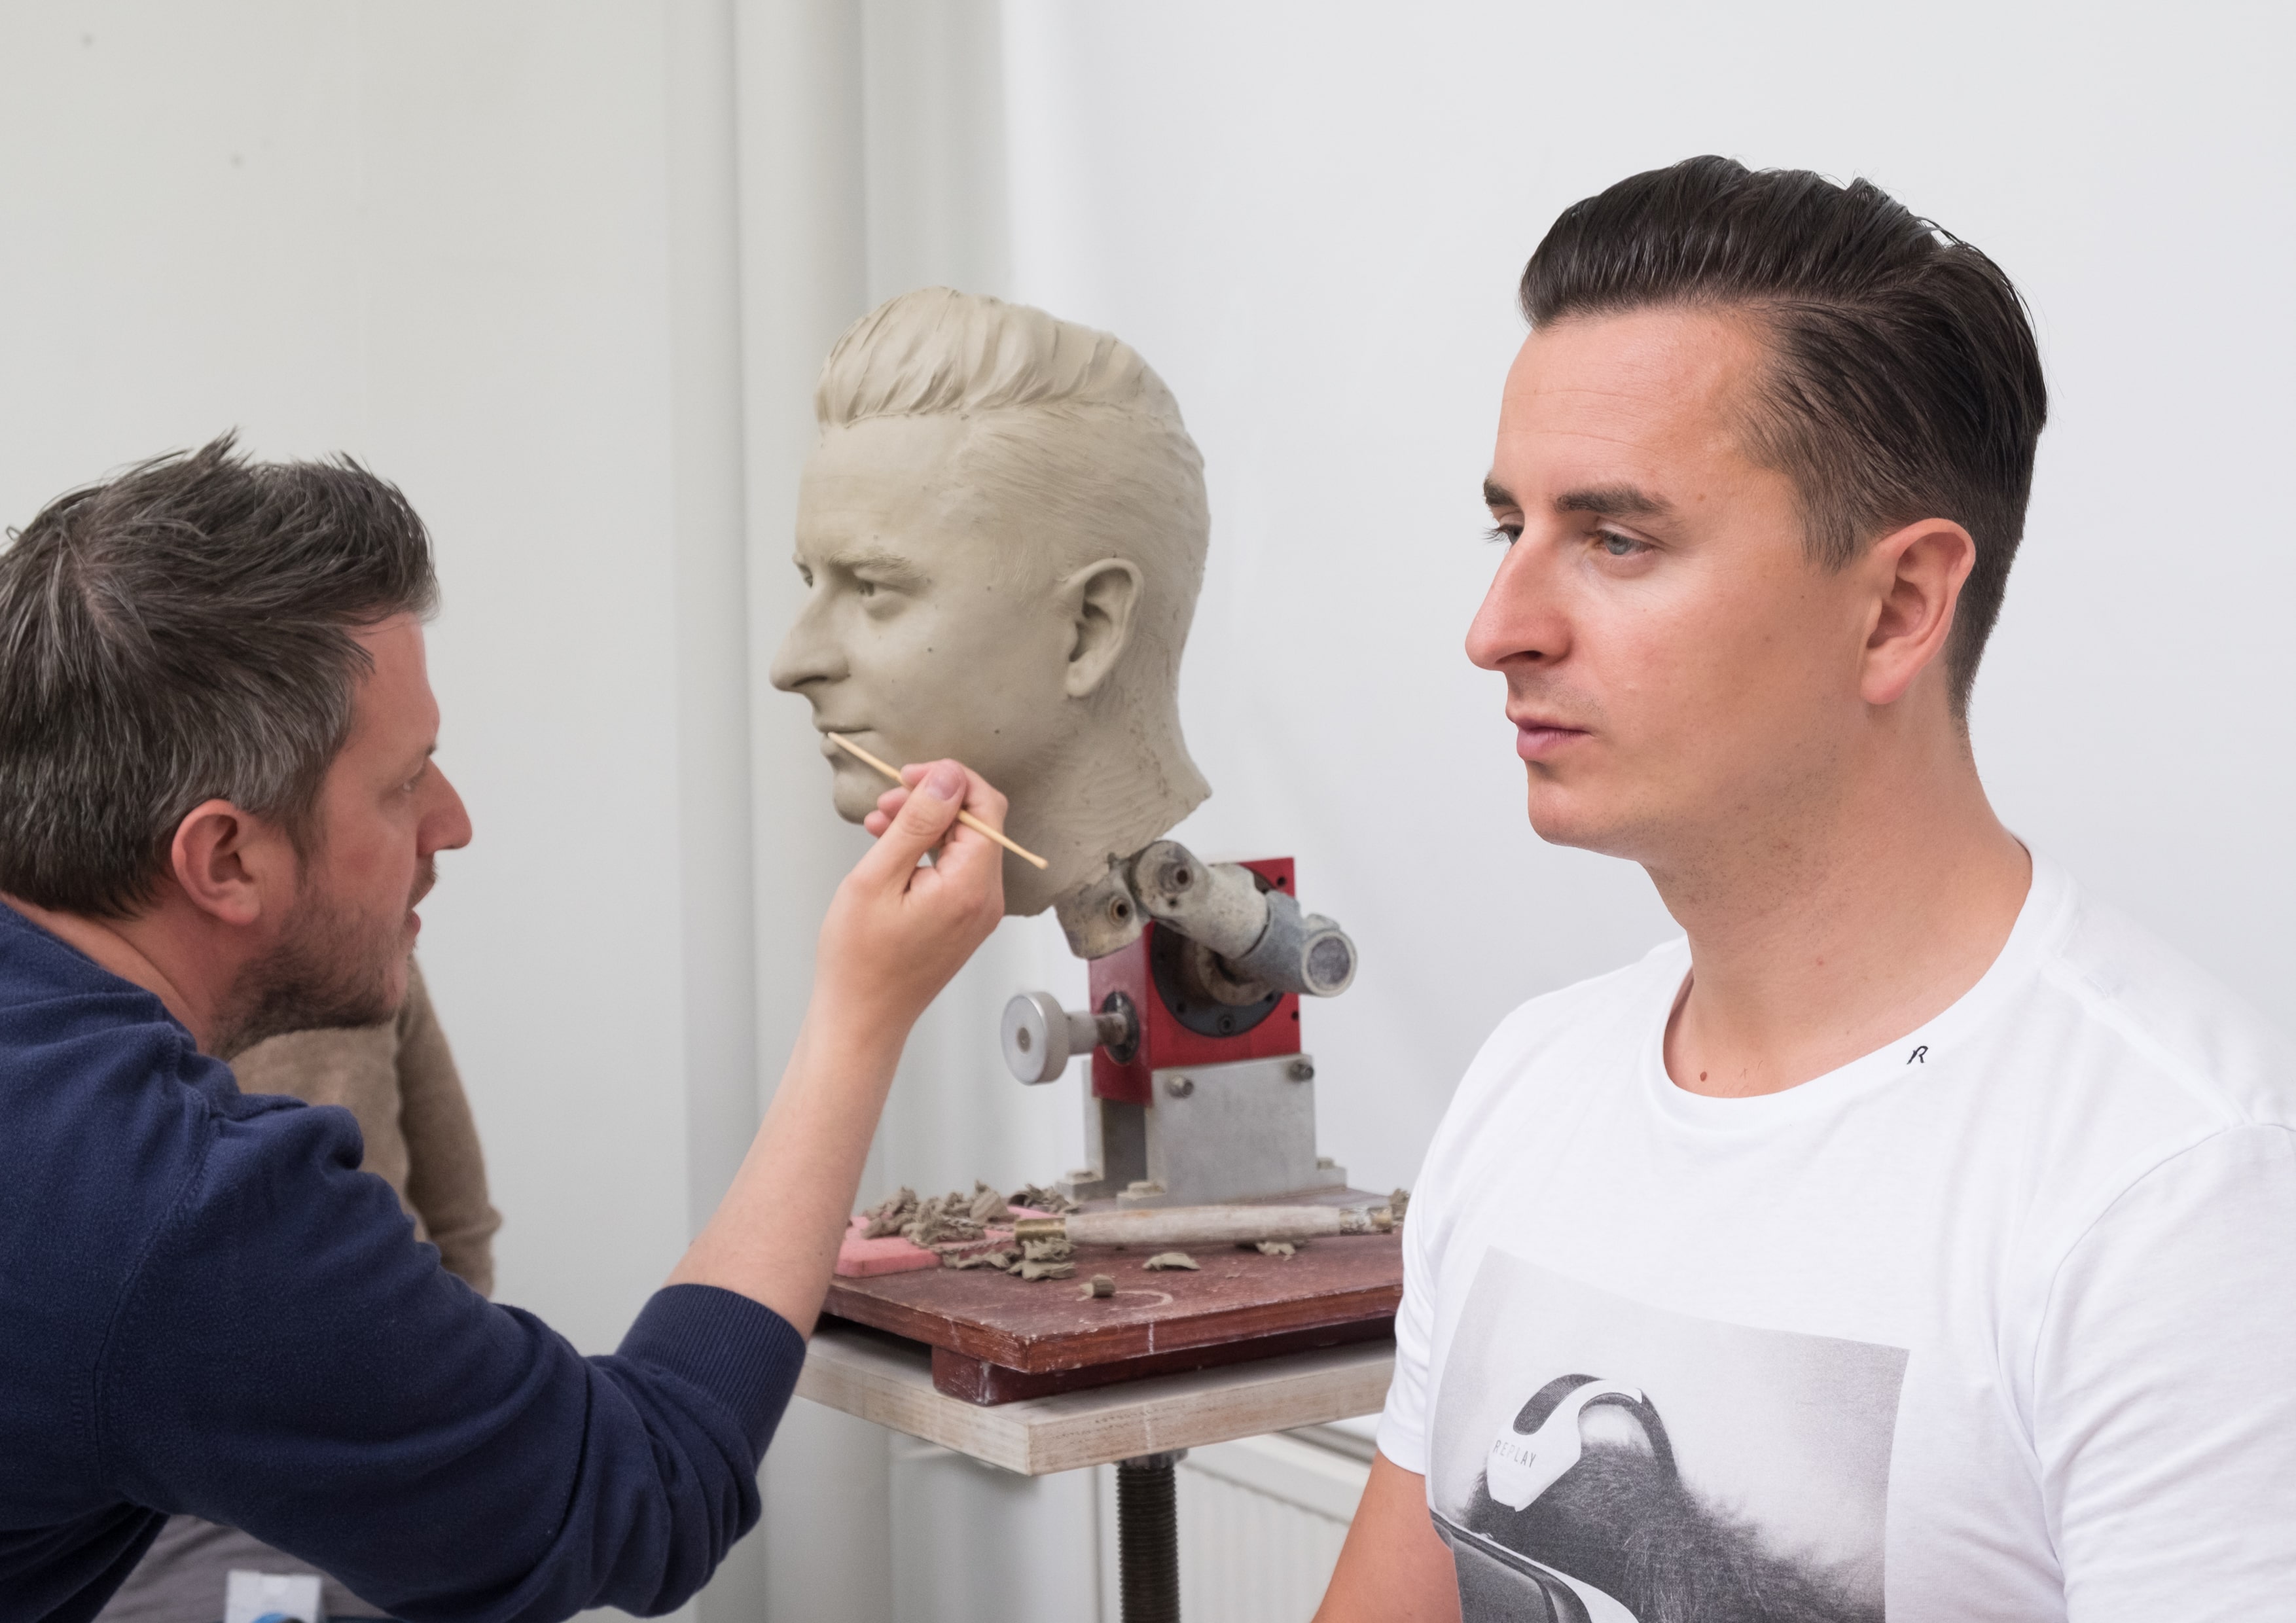 Making of Andreas Gabalier's wax figure at Madame Tussauds™ Wien